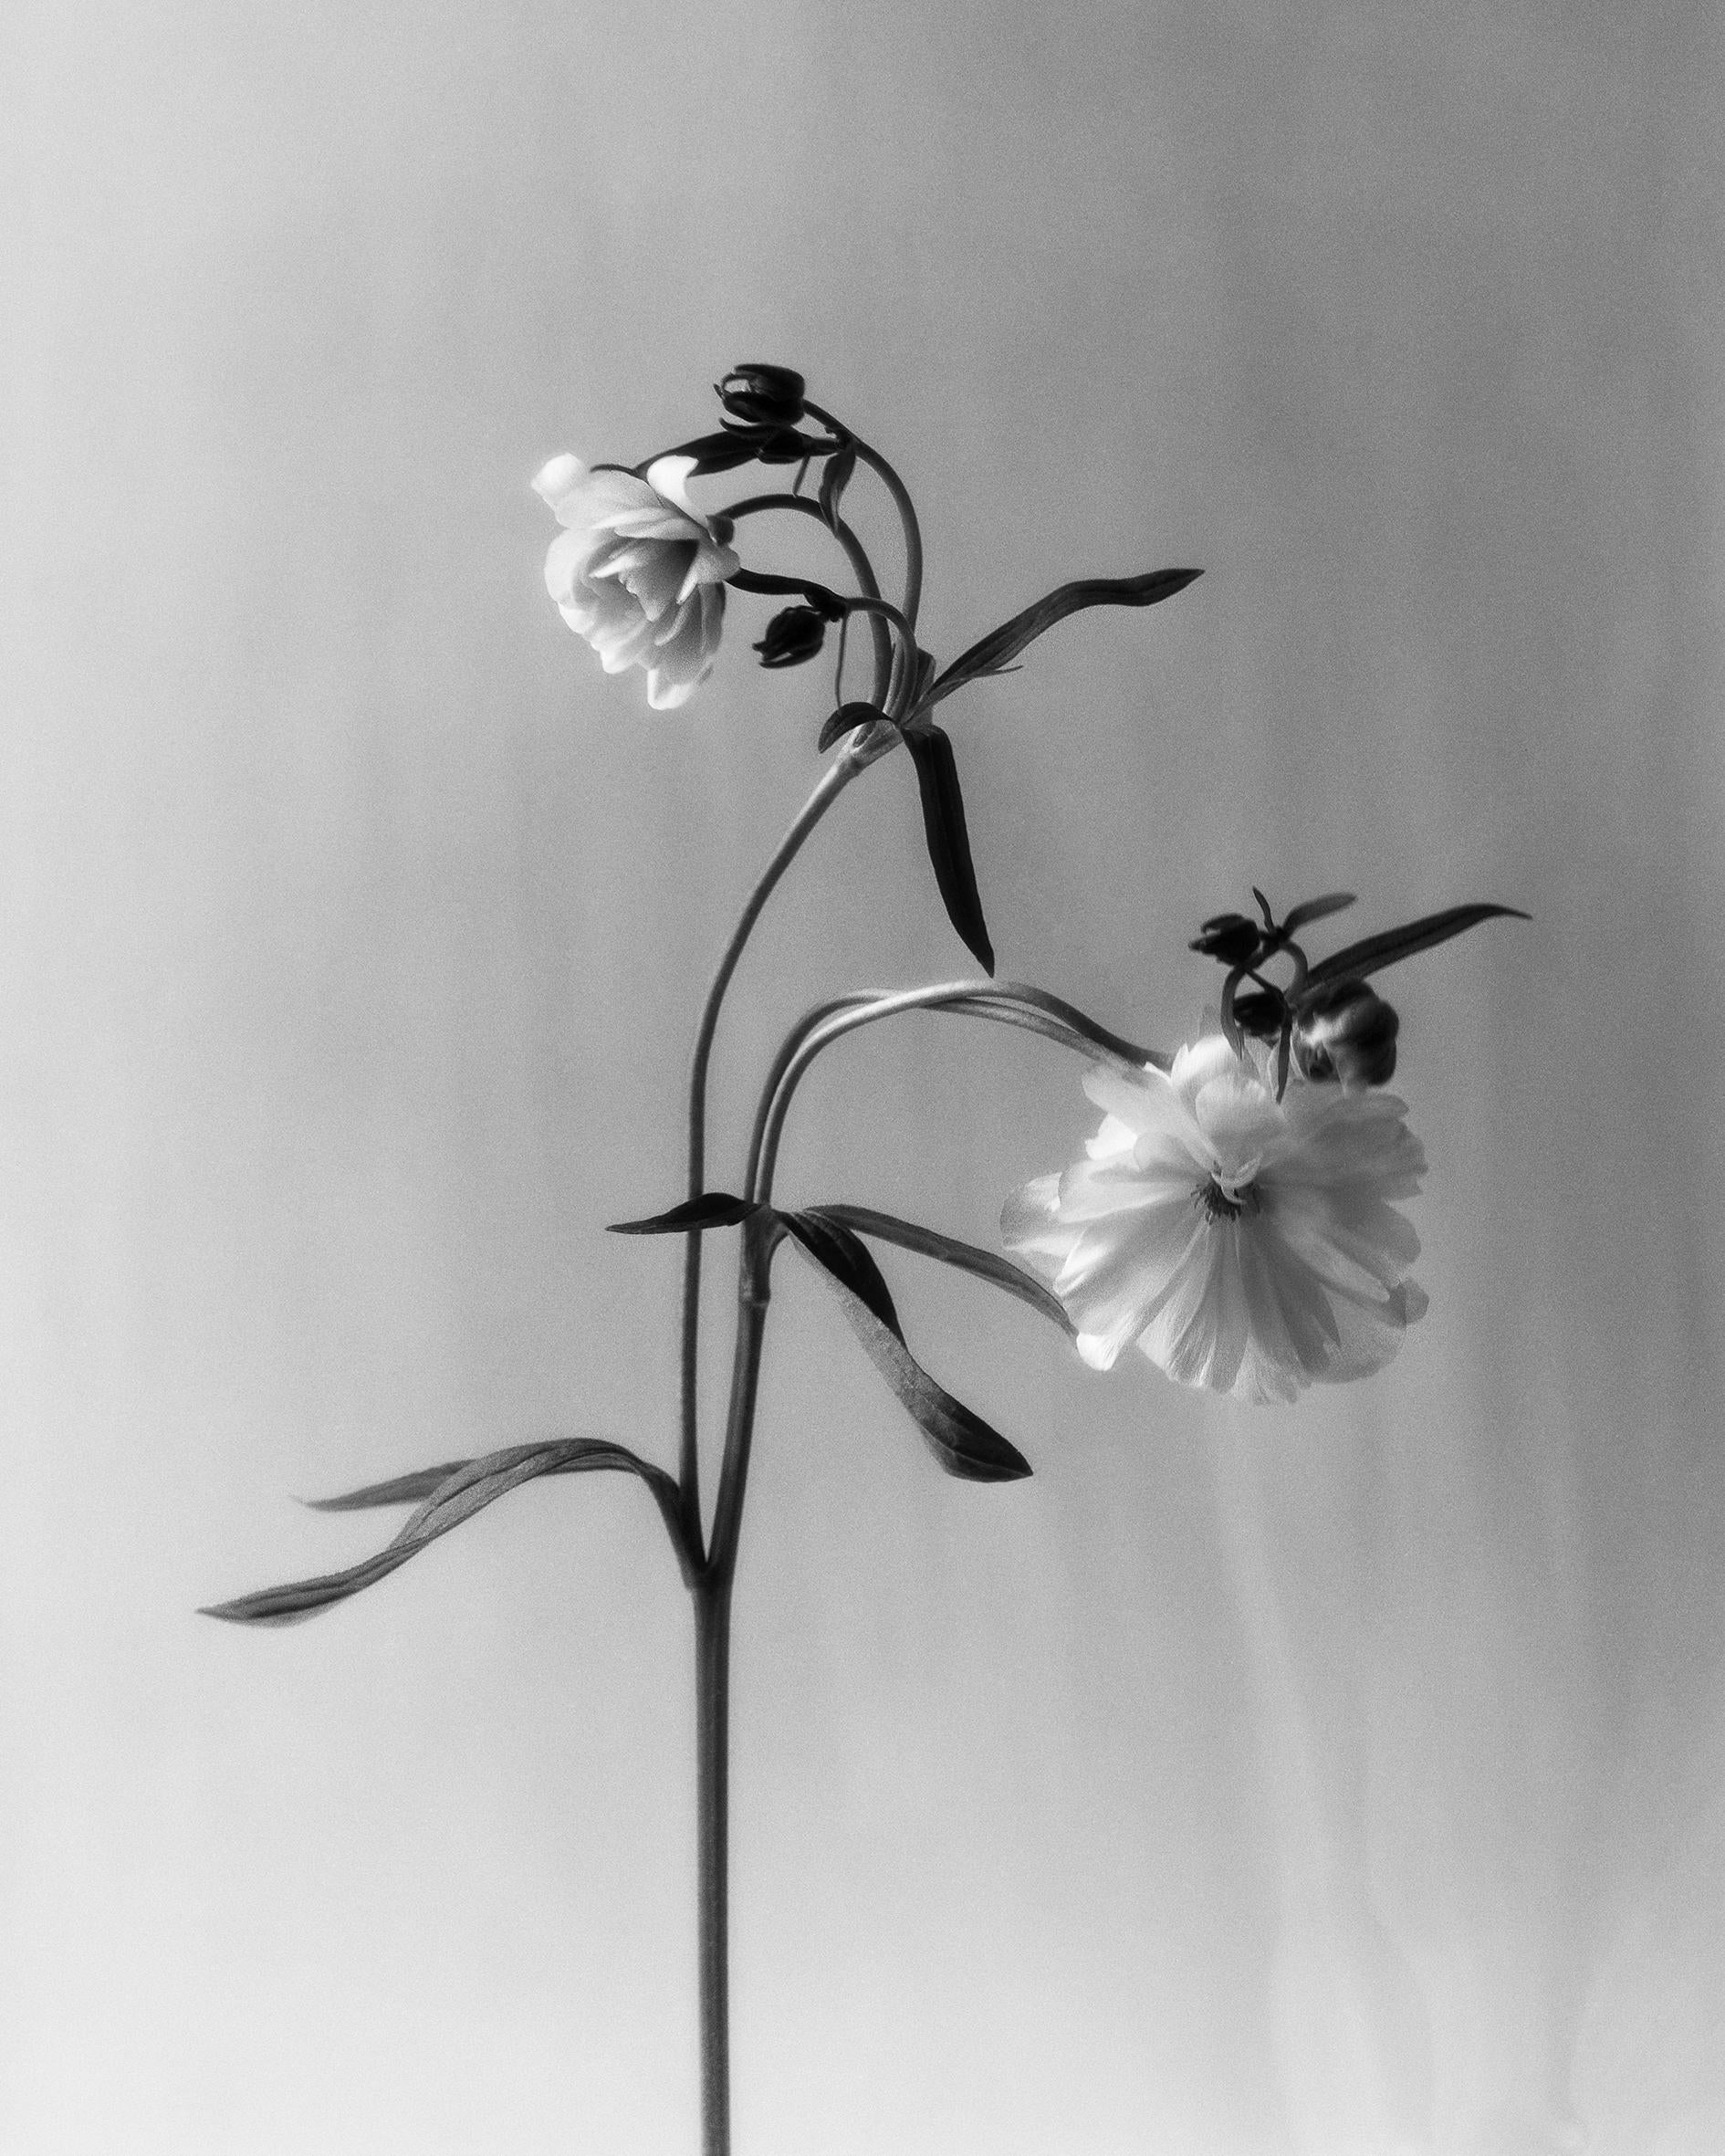 Ranunculus Butterfly - analogue black and white floral photography